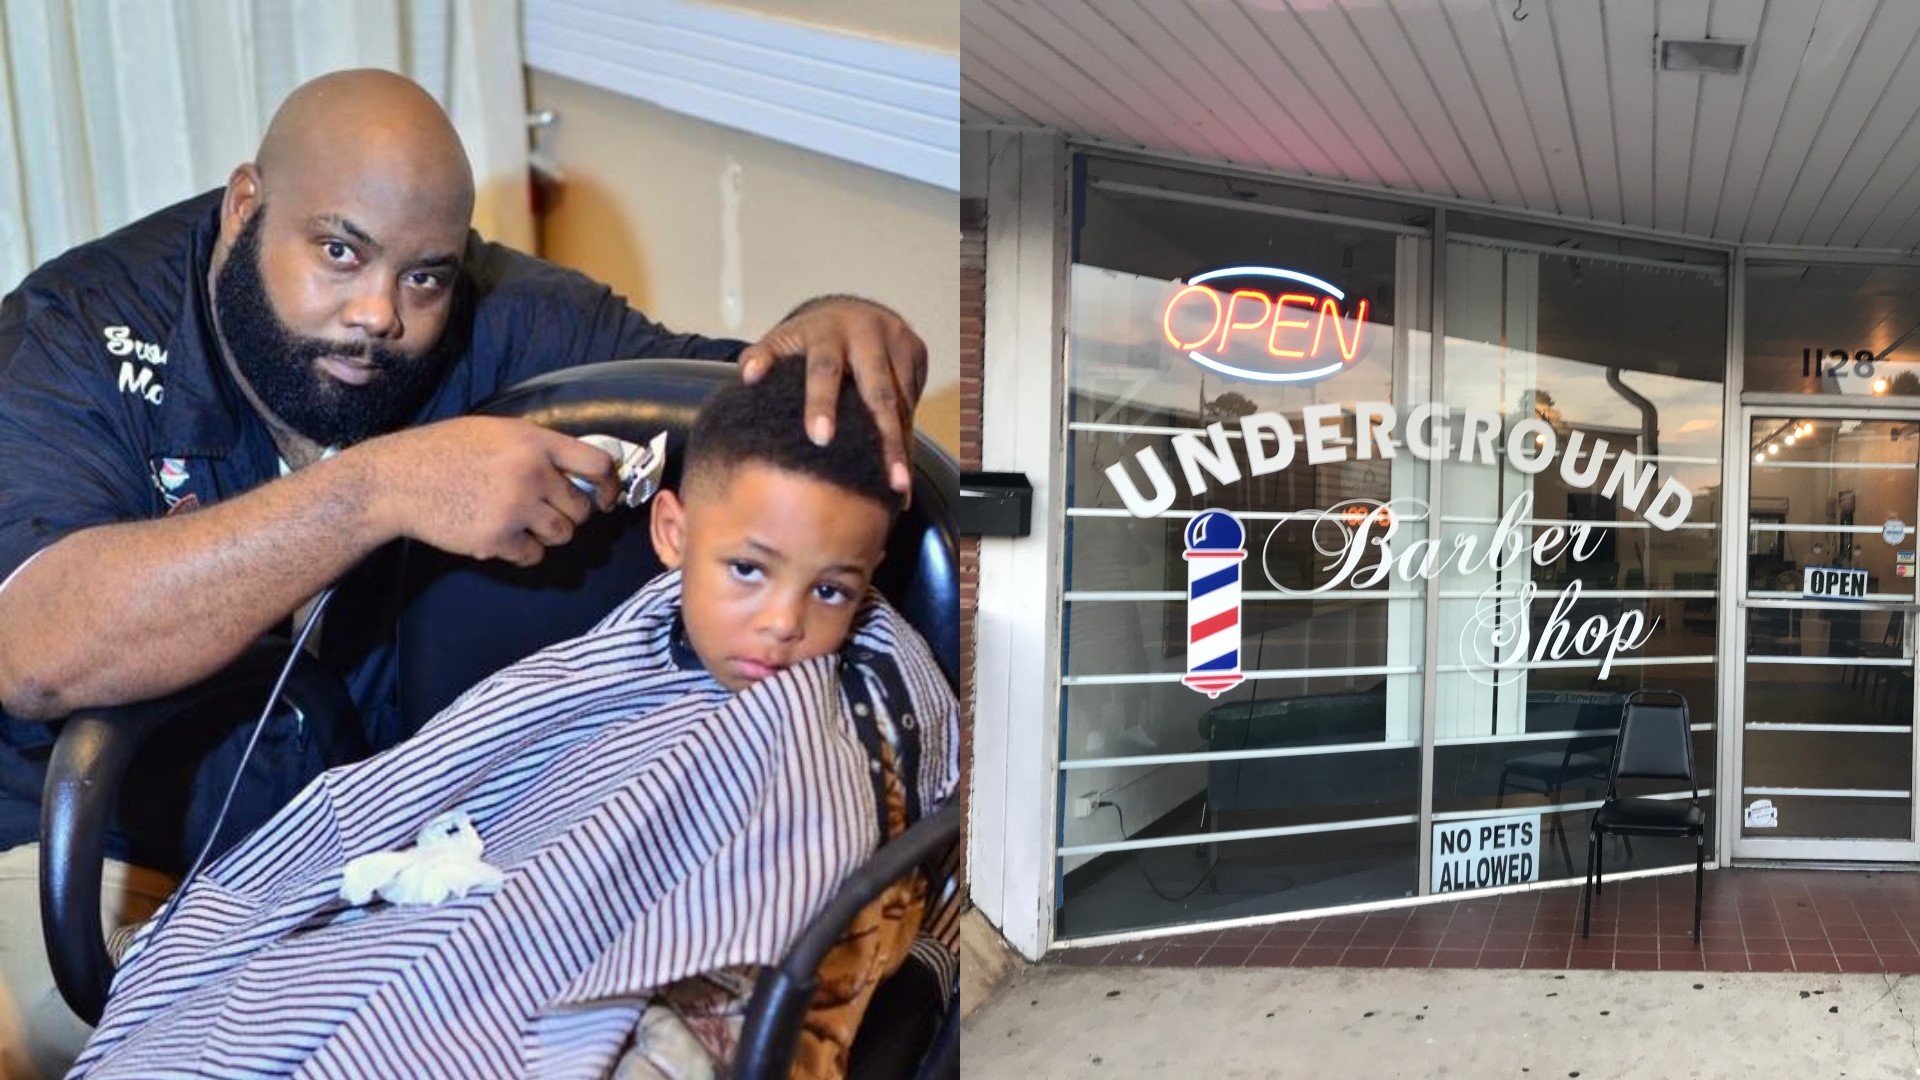 Jermaine Jeffries is the owner of Underground Barbershop in Warner Robins. The father of 5 is opening a second location in Macon next month.